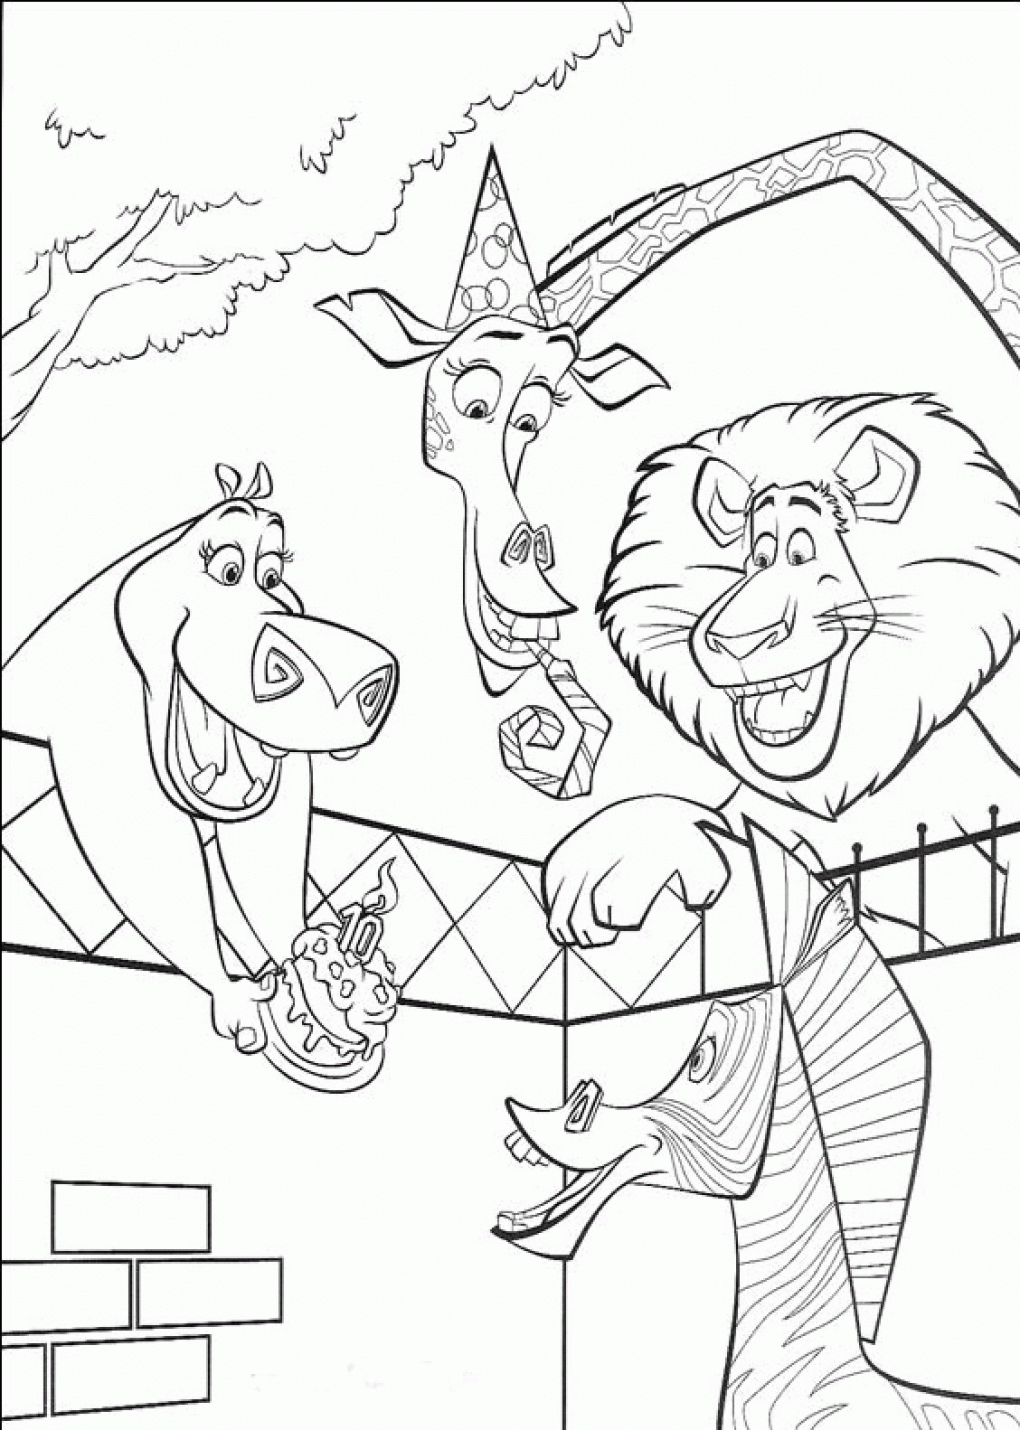 The 4 friends of Madagascar to color